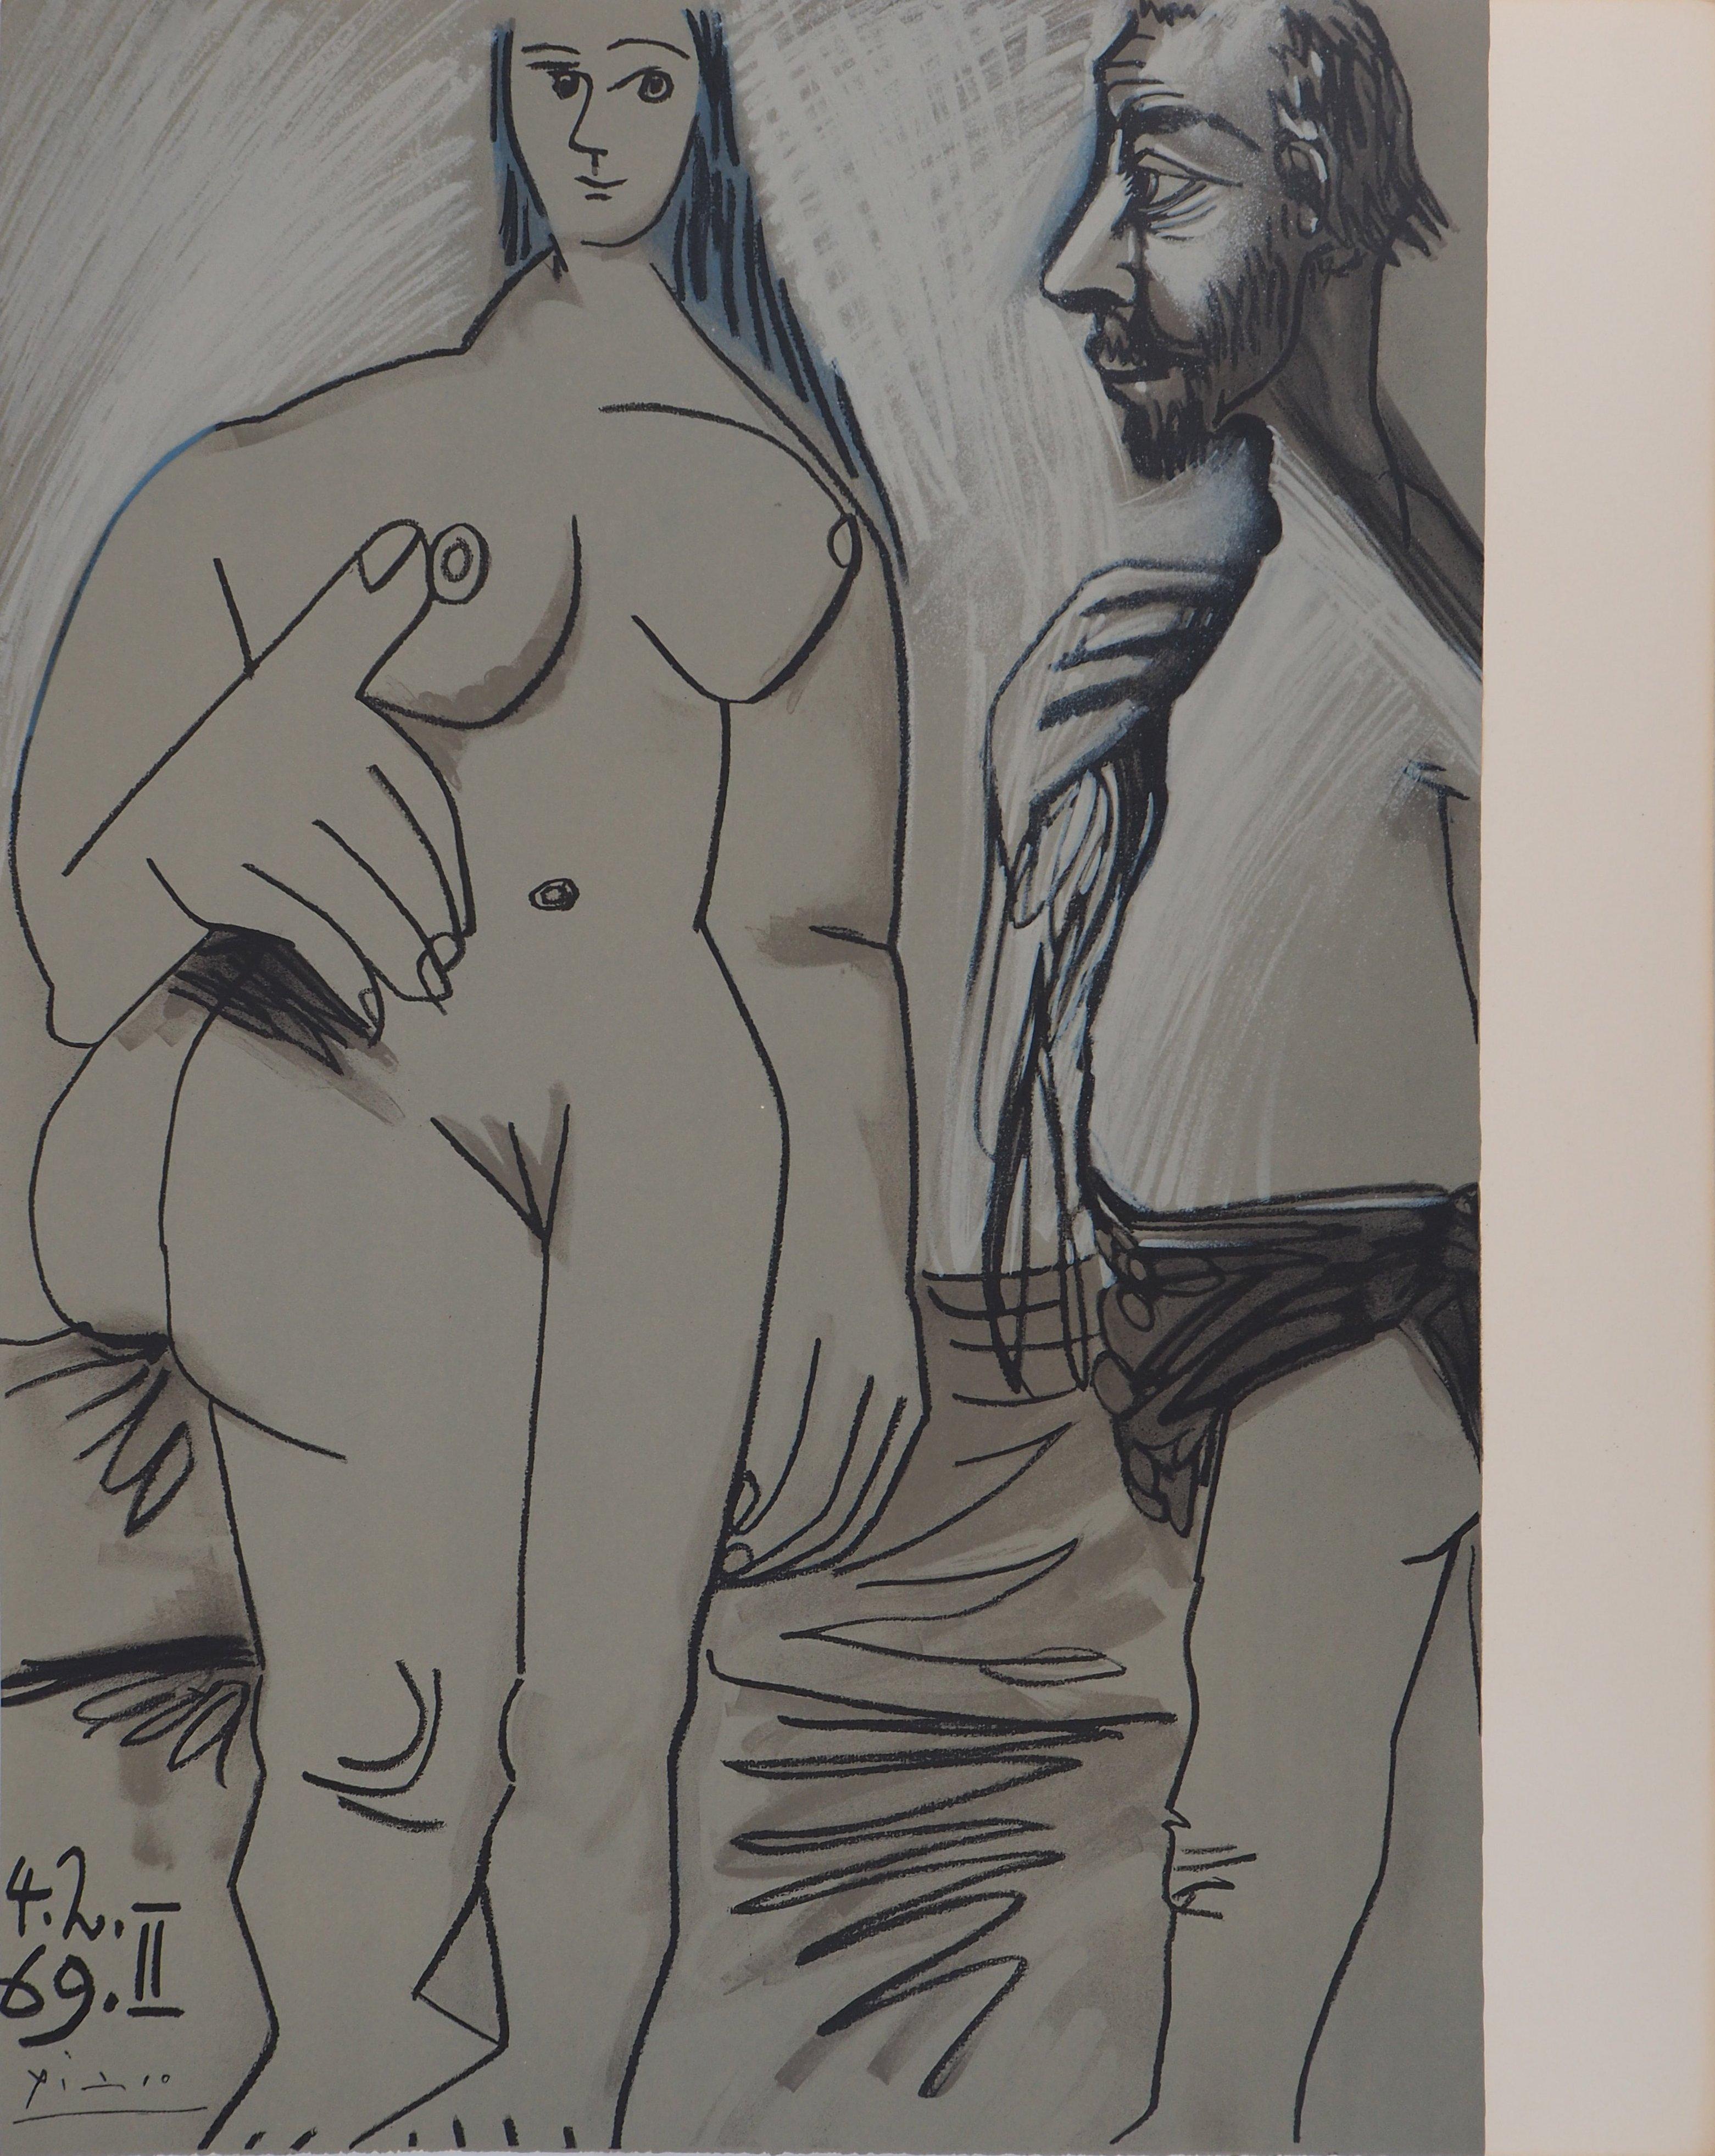 (after) Pablo Picasso Figurative Print - Model and Painter - Lithograph (Mourlot 1971)